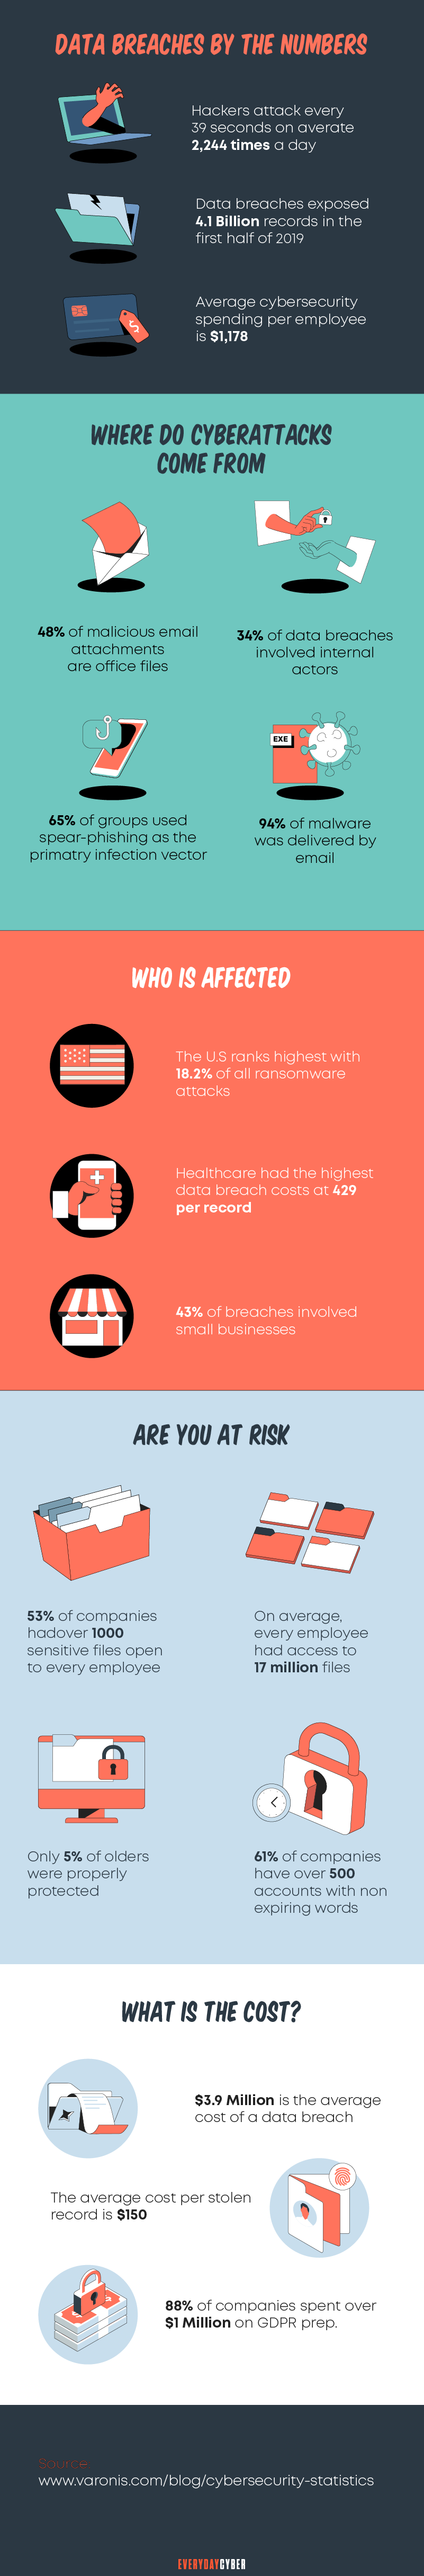 Small business and SMB Cyber Security Statistics